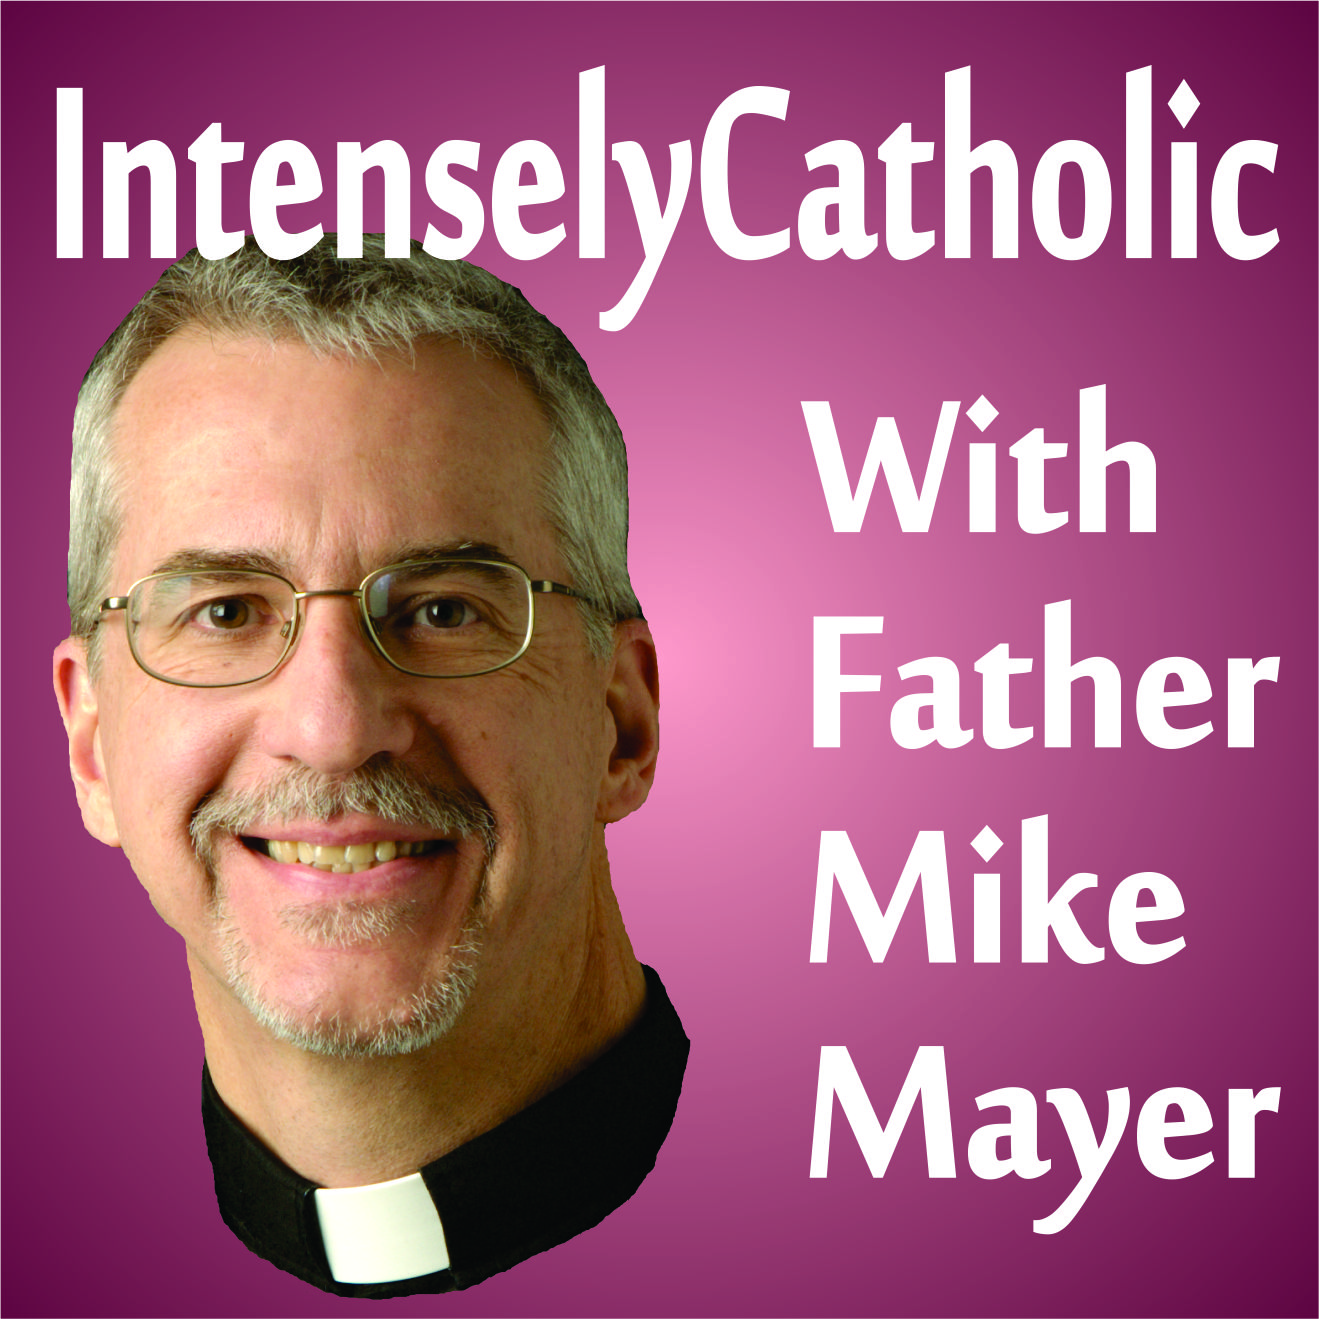 Good Friday Homily by Fr. Mike Mayer